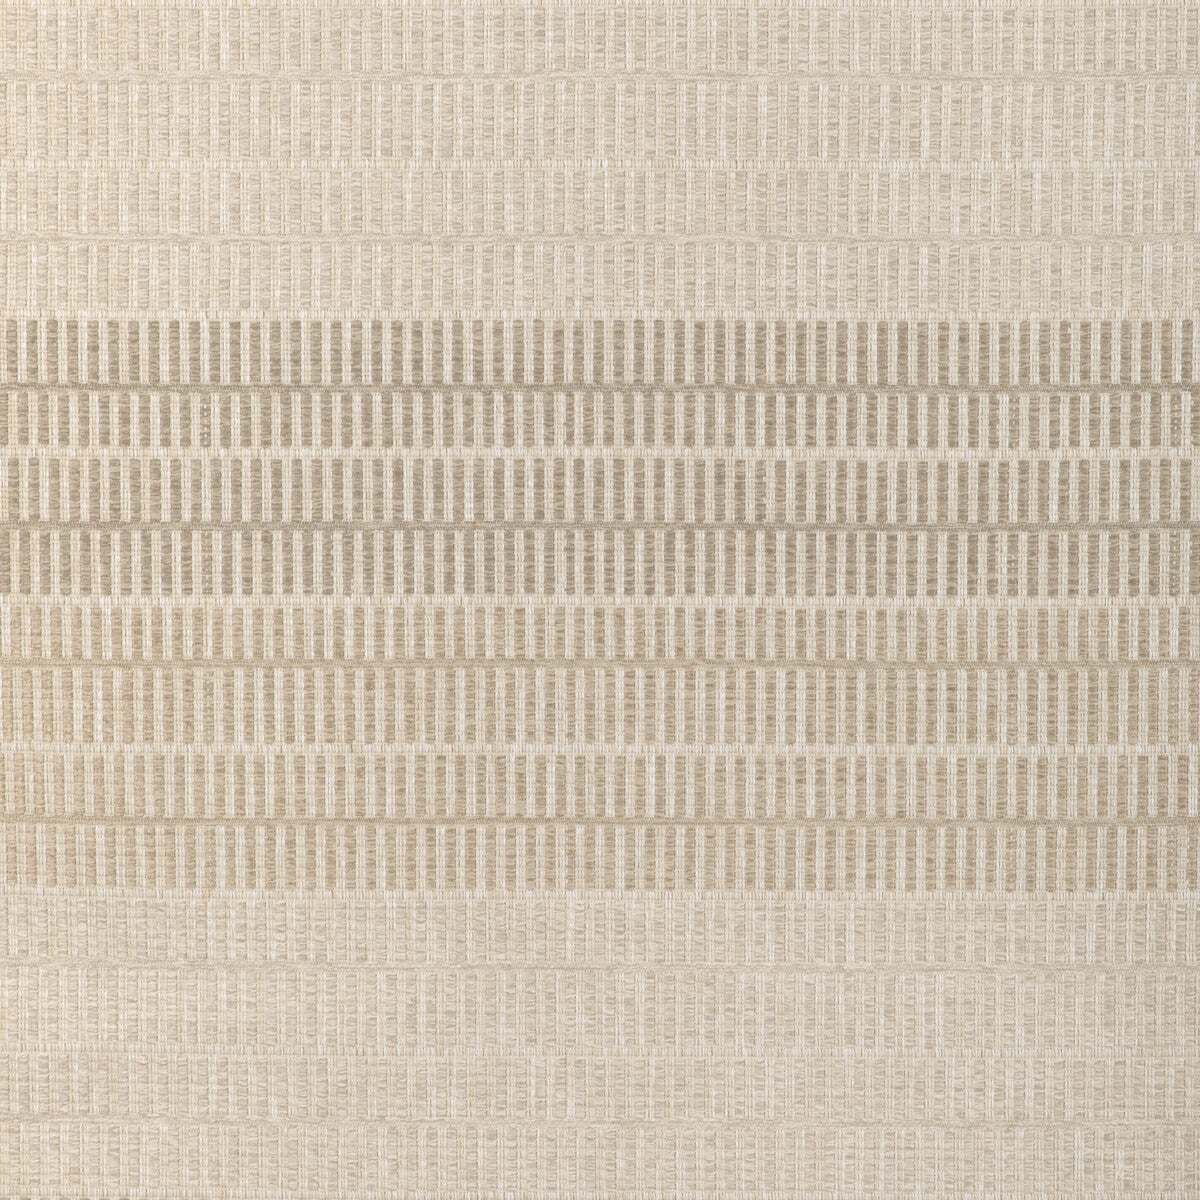 Les Oliviers Weave fabric in linen color - pattern 8024117.1611.0 - by Brunschwig &amp; Fils in the Les Ensembliers L&